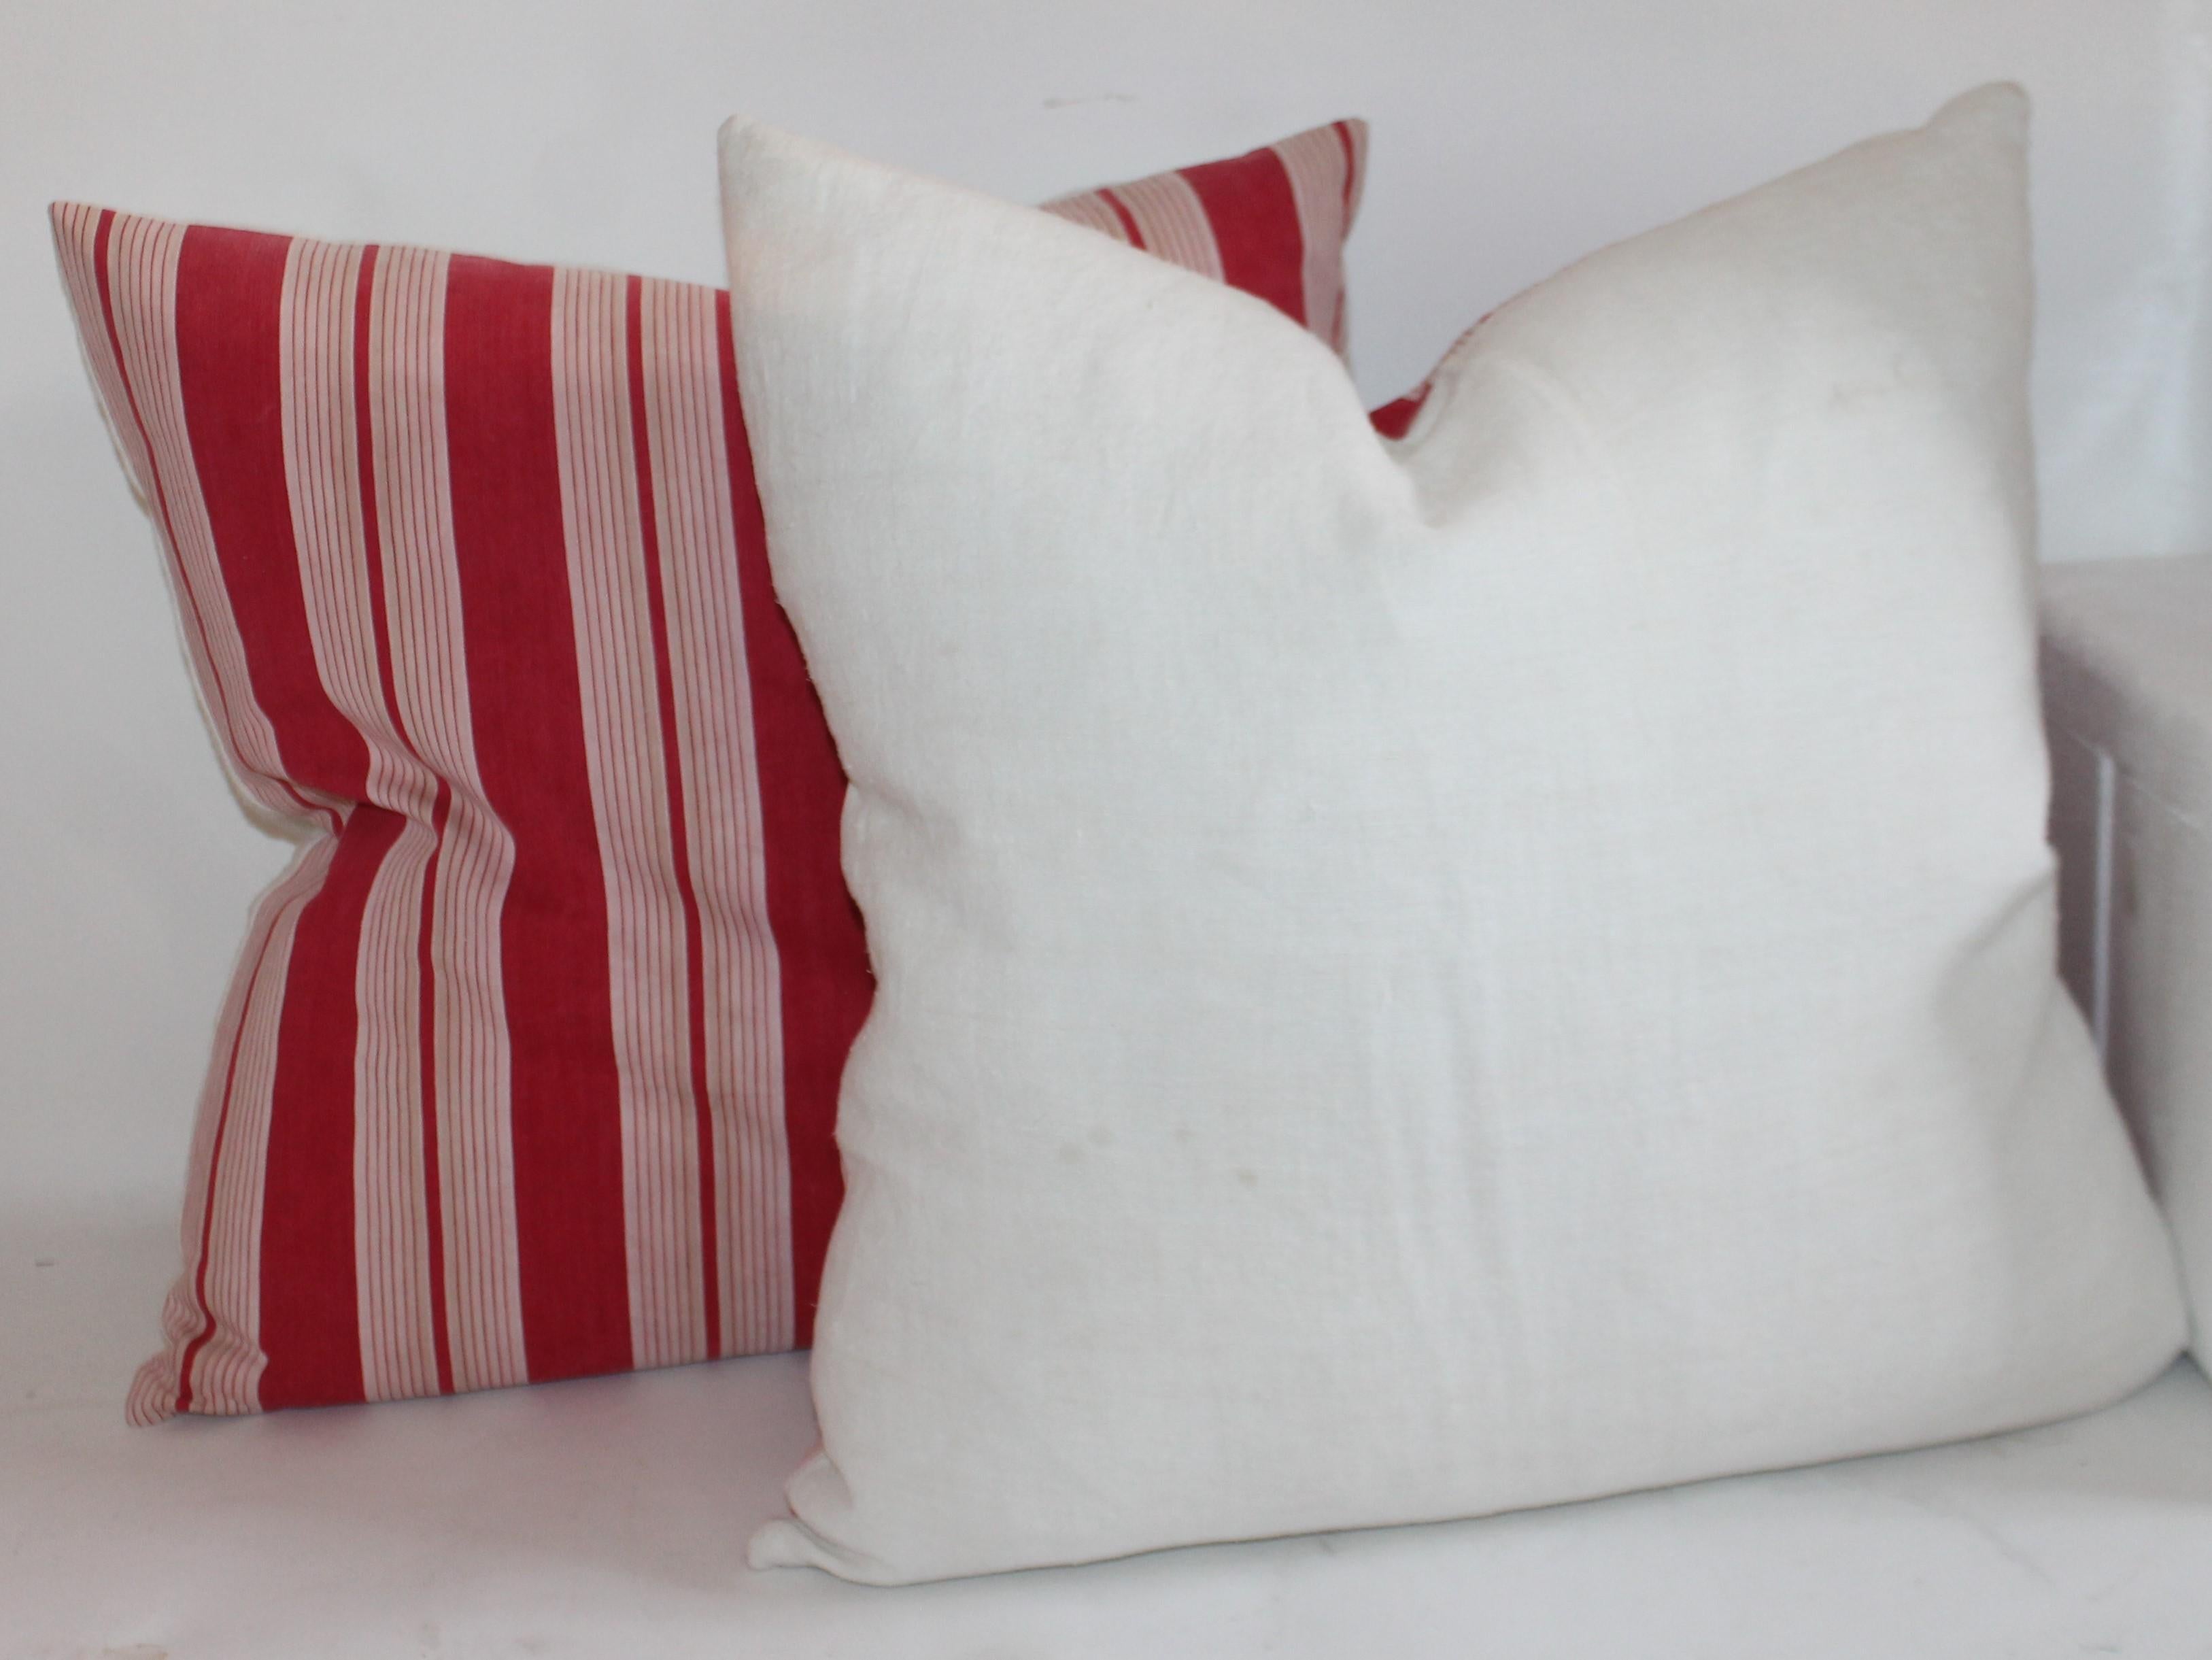 Hand-Crafted 19th Century Antique Ticking Pillows / Two Pairs For Sale